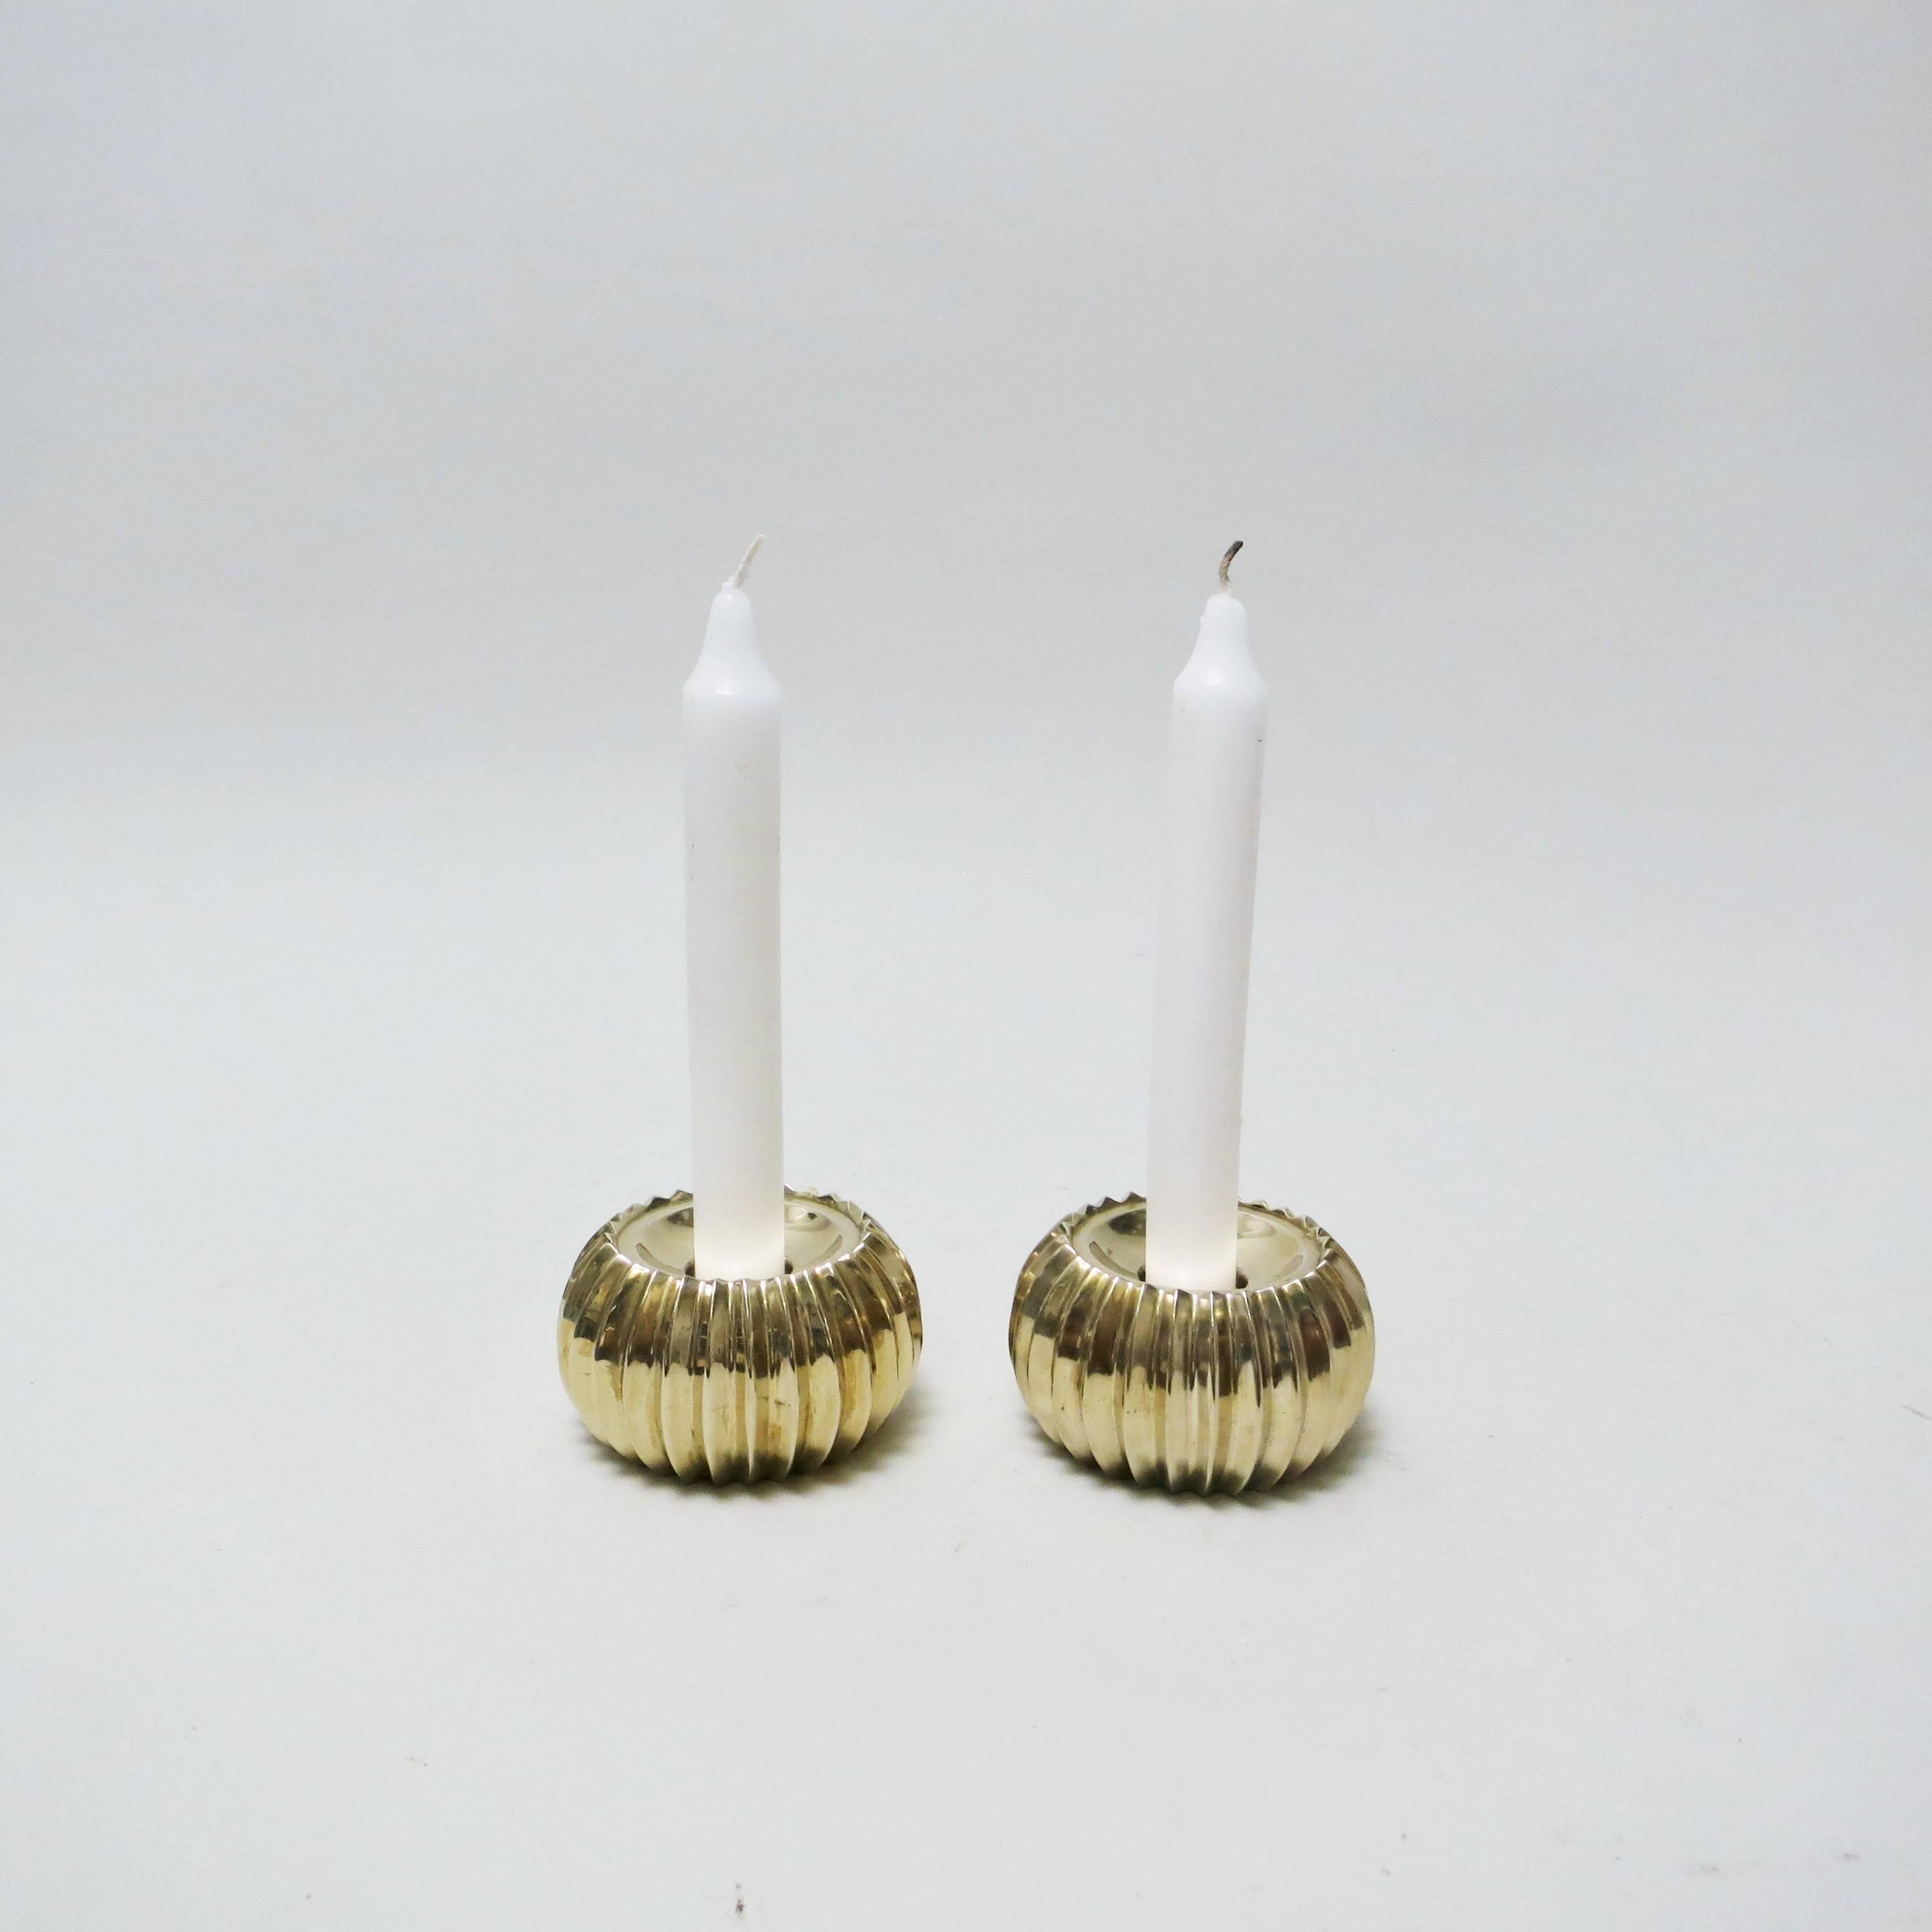 Pair of scandinavian candleholder from the 1960s. Beautifull round form with fluted decor made of molded brass for a single candle of 1cm diameter. 
Beautiful original condition.